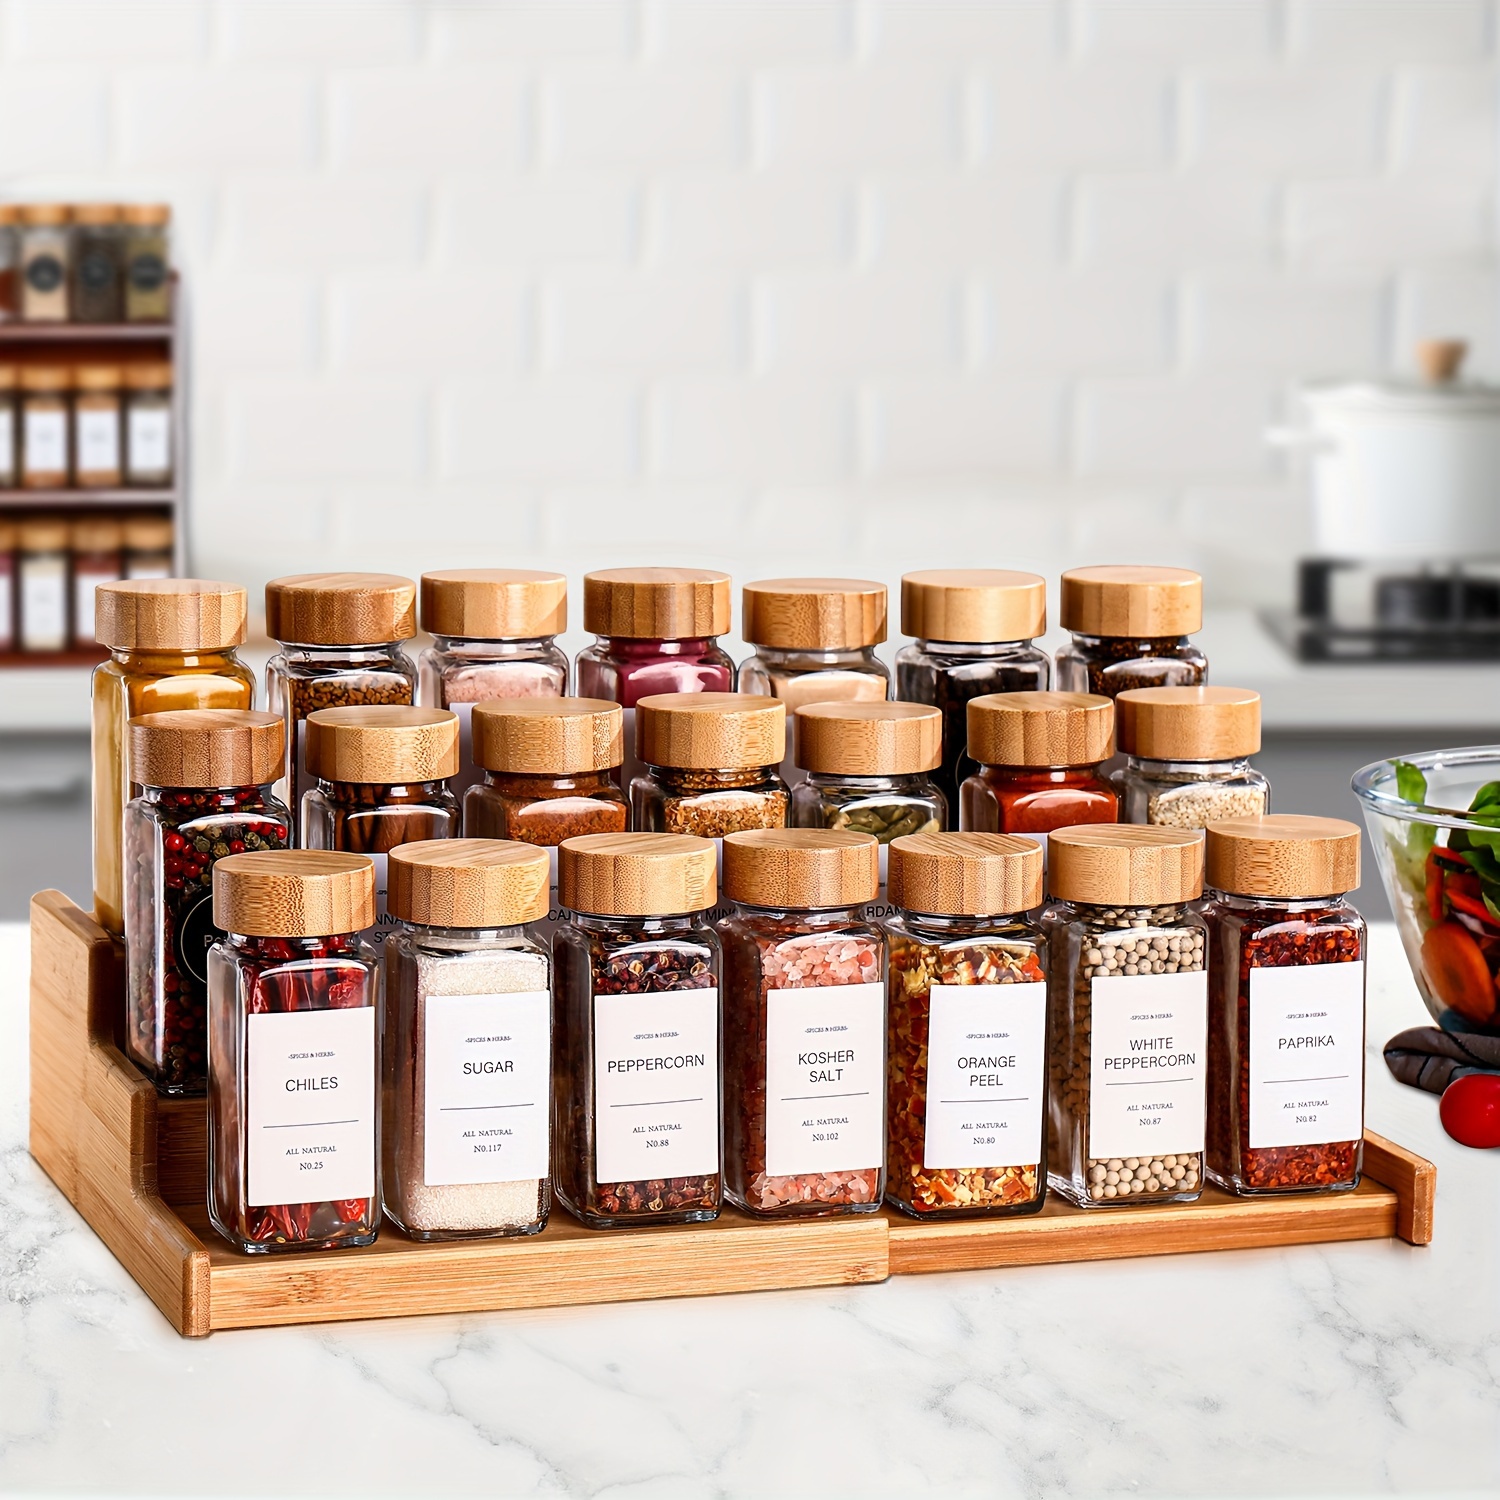 48 Spice Jars with Labels- Spice Jars with Bamboo Lids - 4 oz Glass Spice Containers with Shaker Lids - As Picture